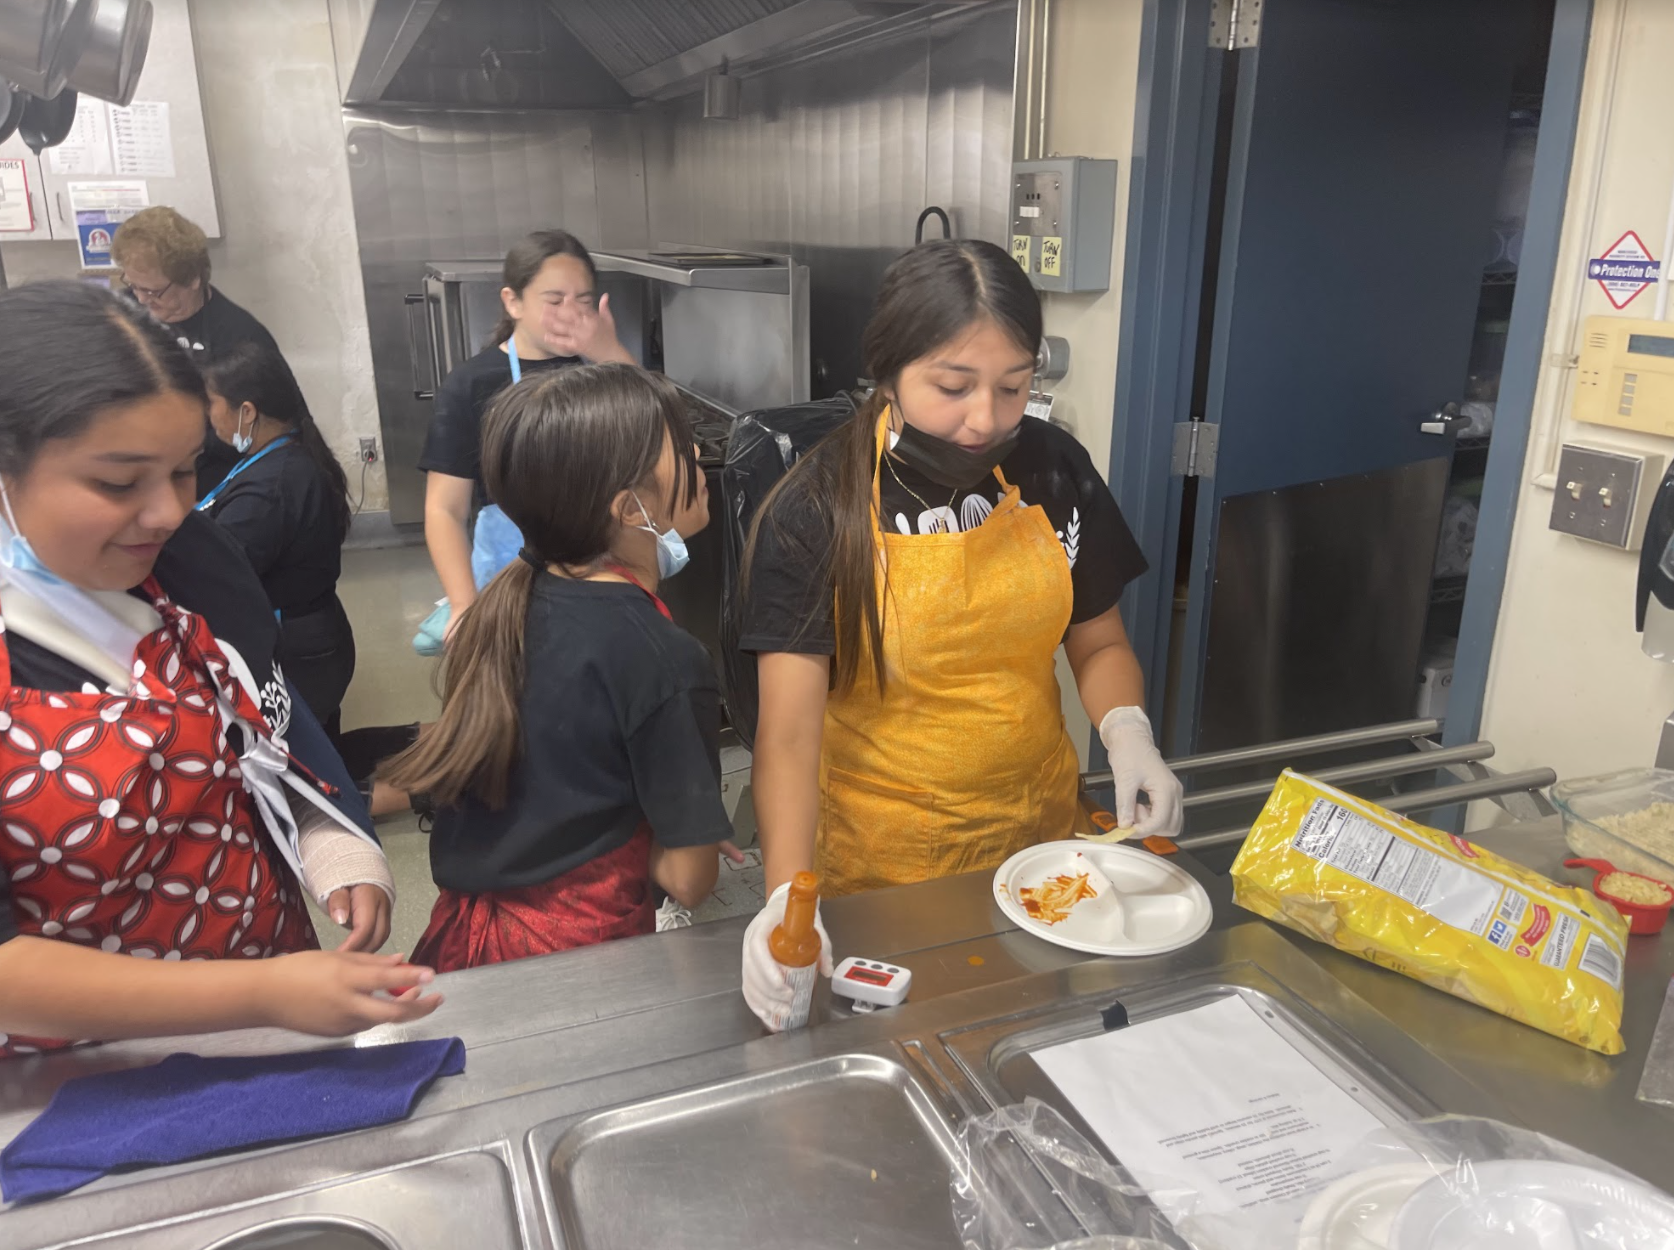 Students cooking in the kitchen